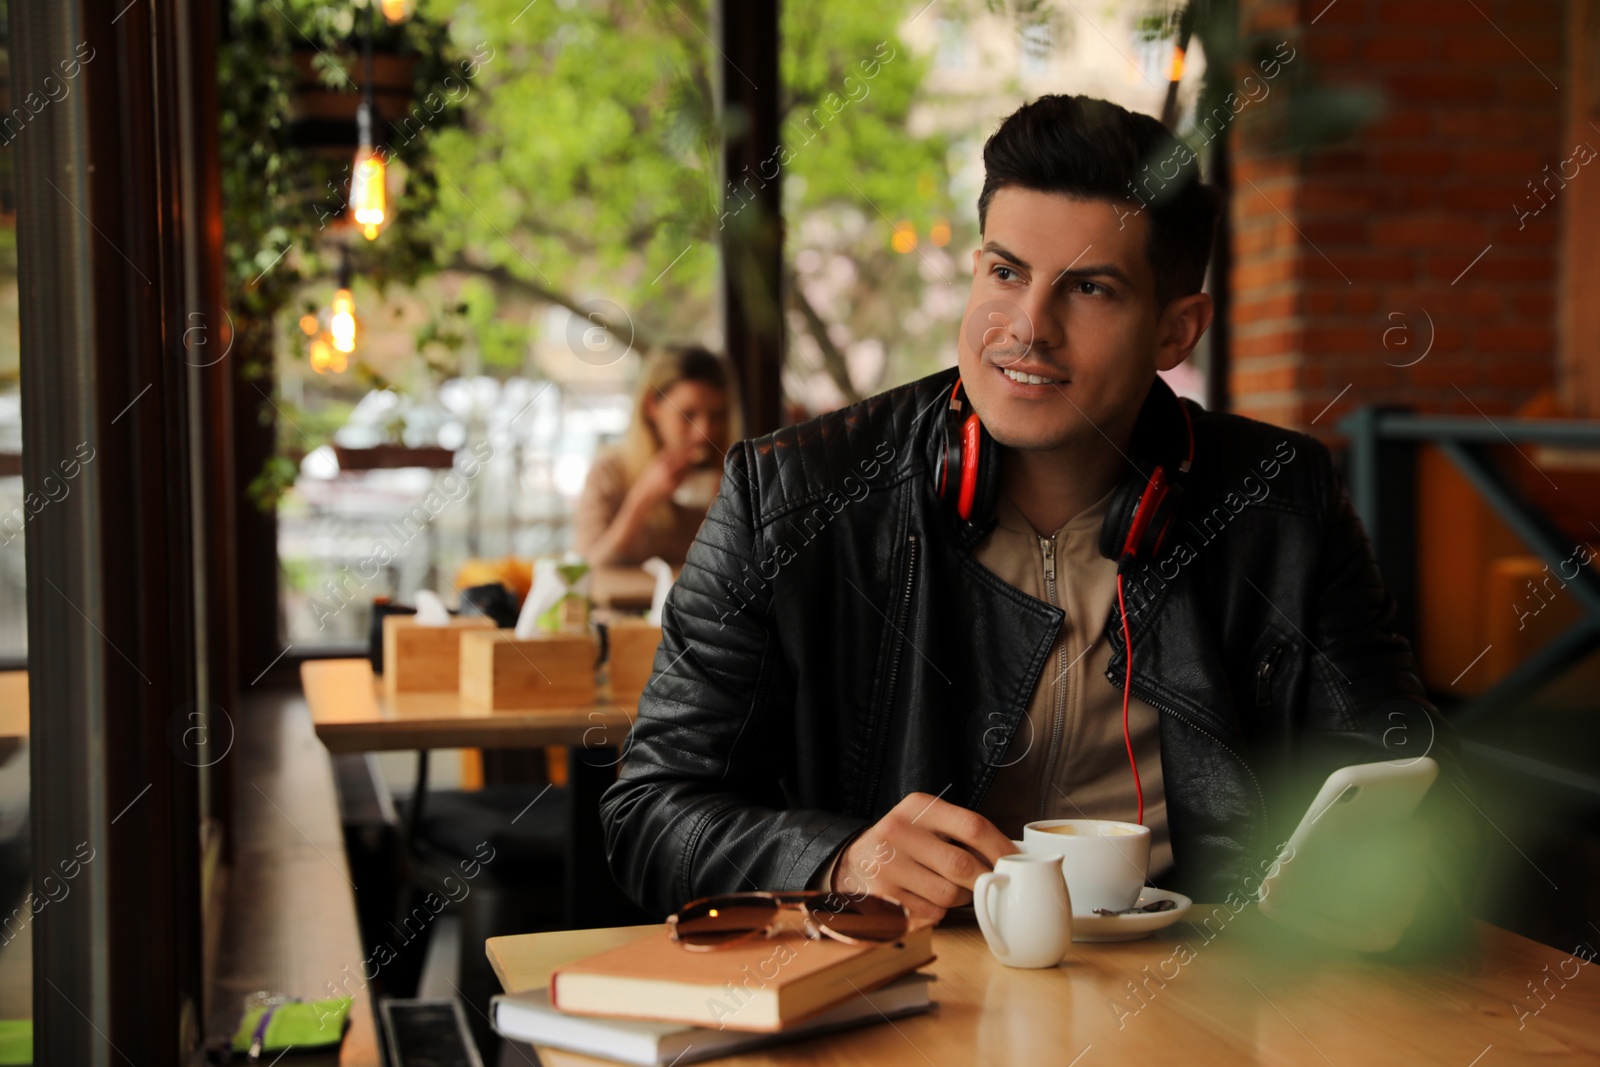 Photo of Man with headphones and smartphone at table in cafe